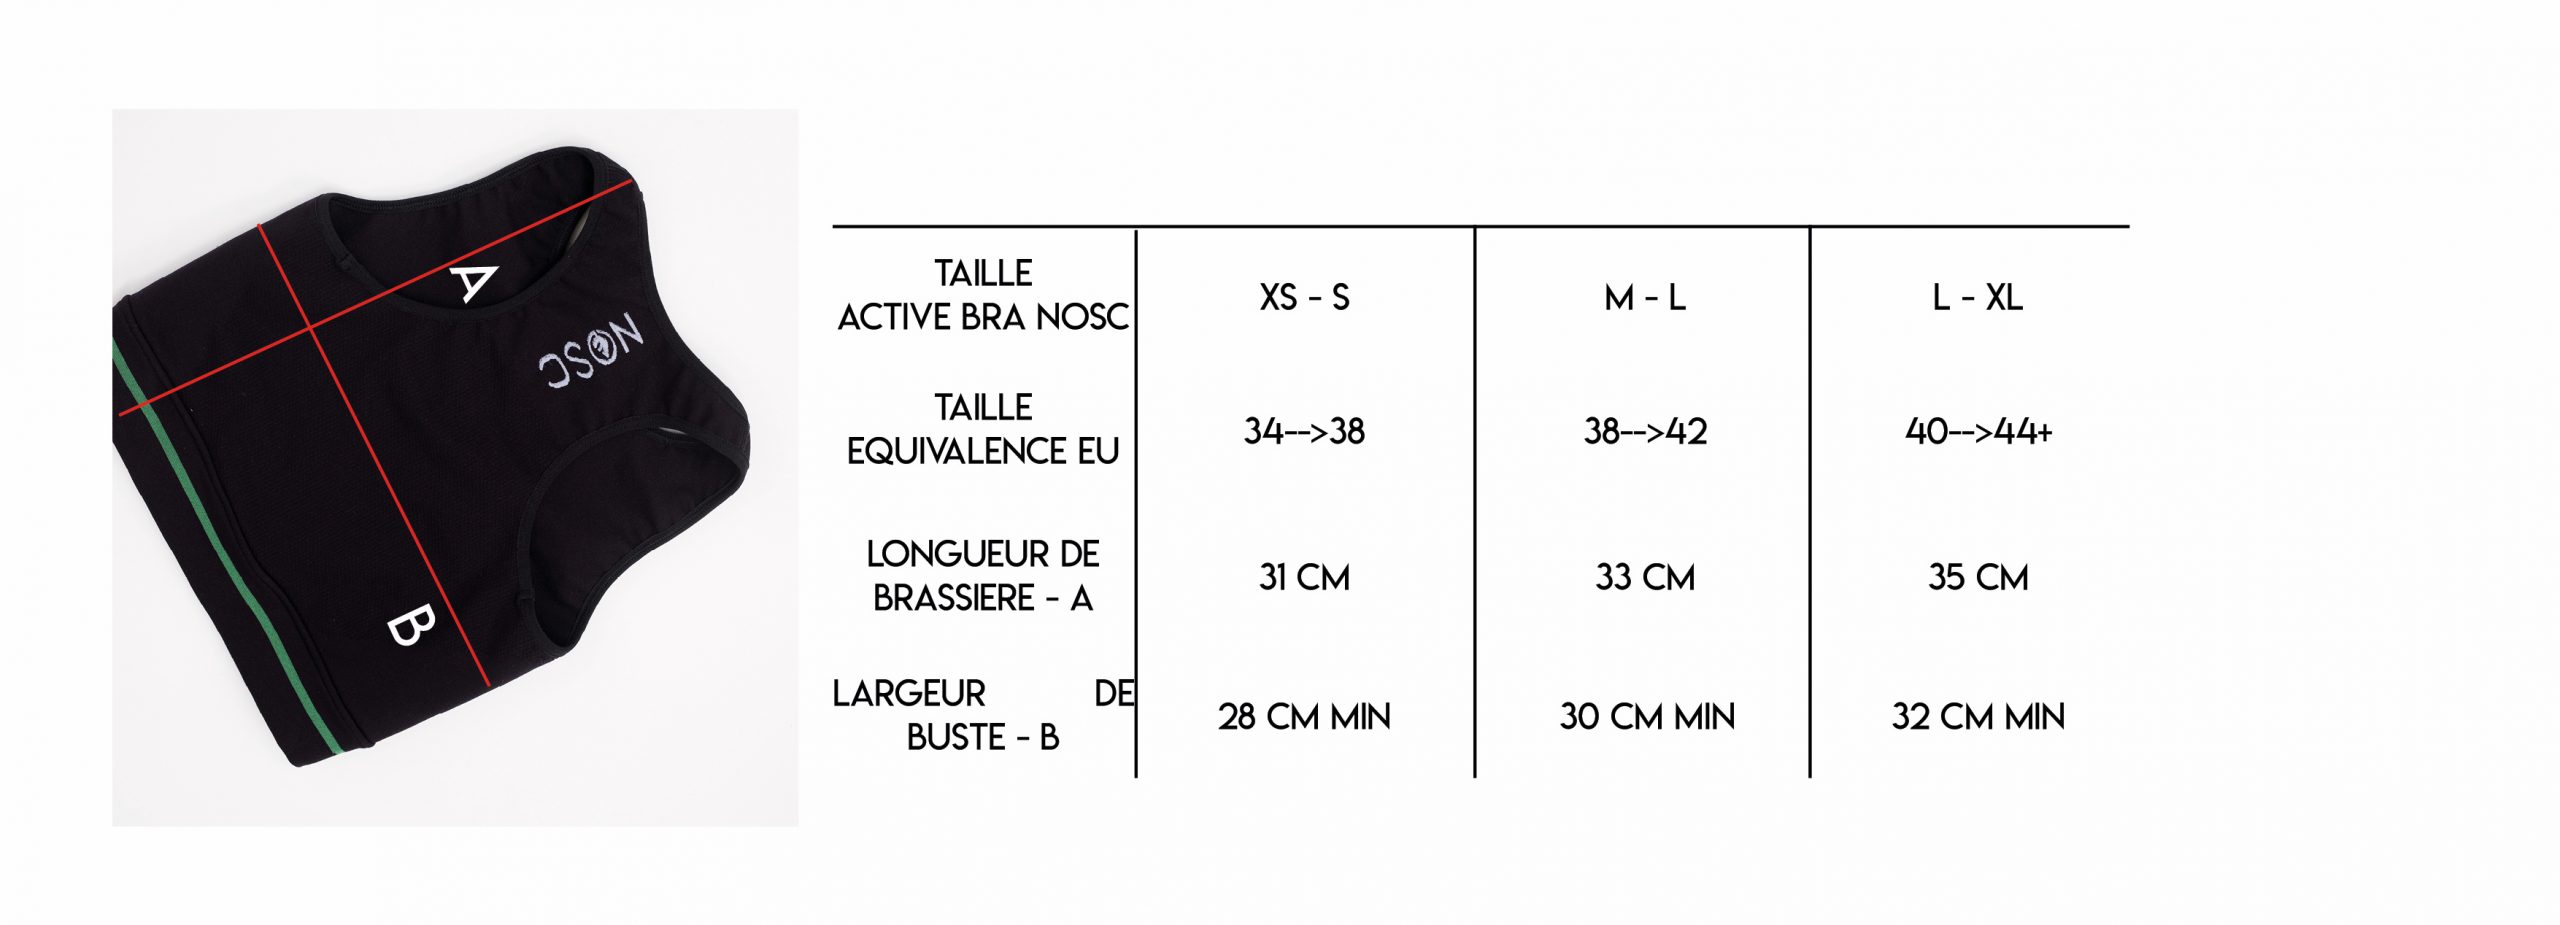 guide_taille_nosc